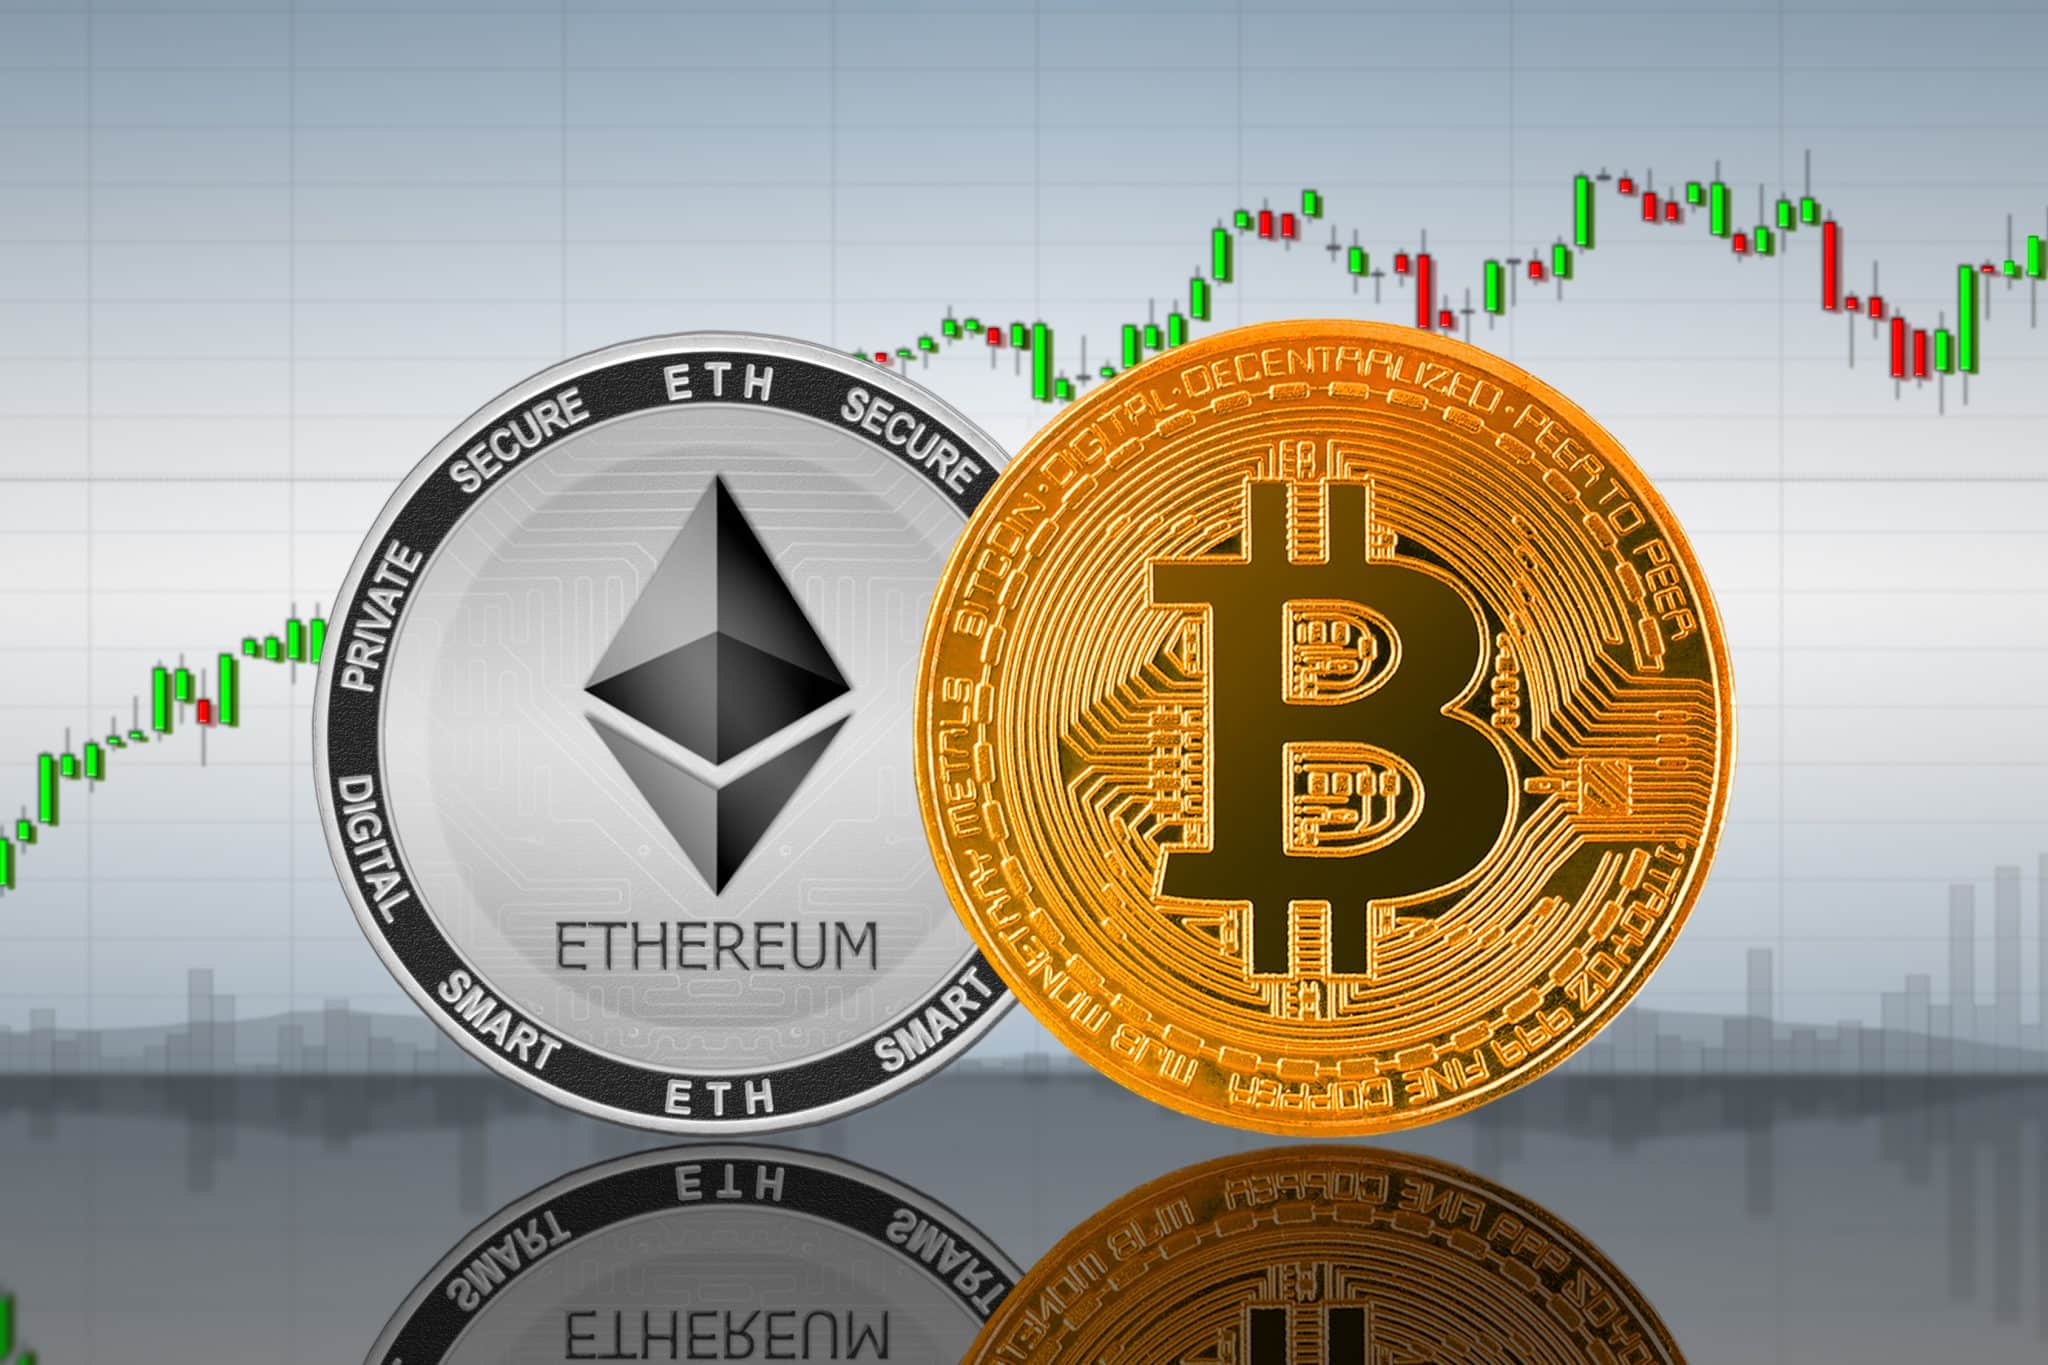 CME Group: Ethereum To Outperform Bitcoin After Halving?